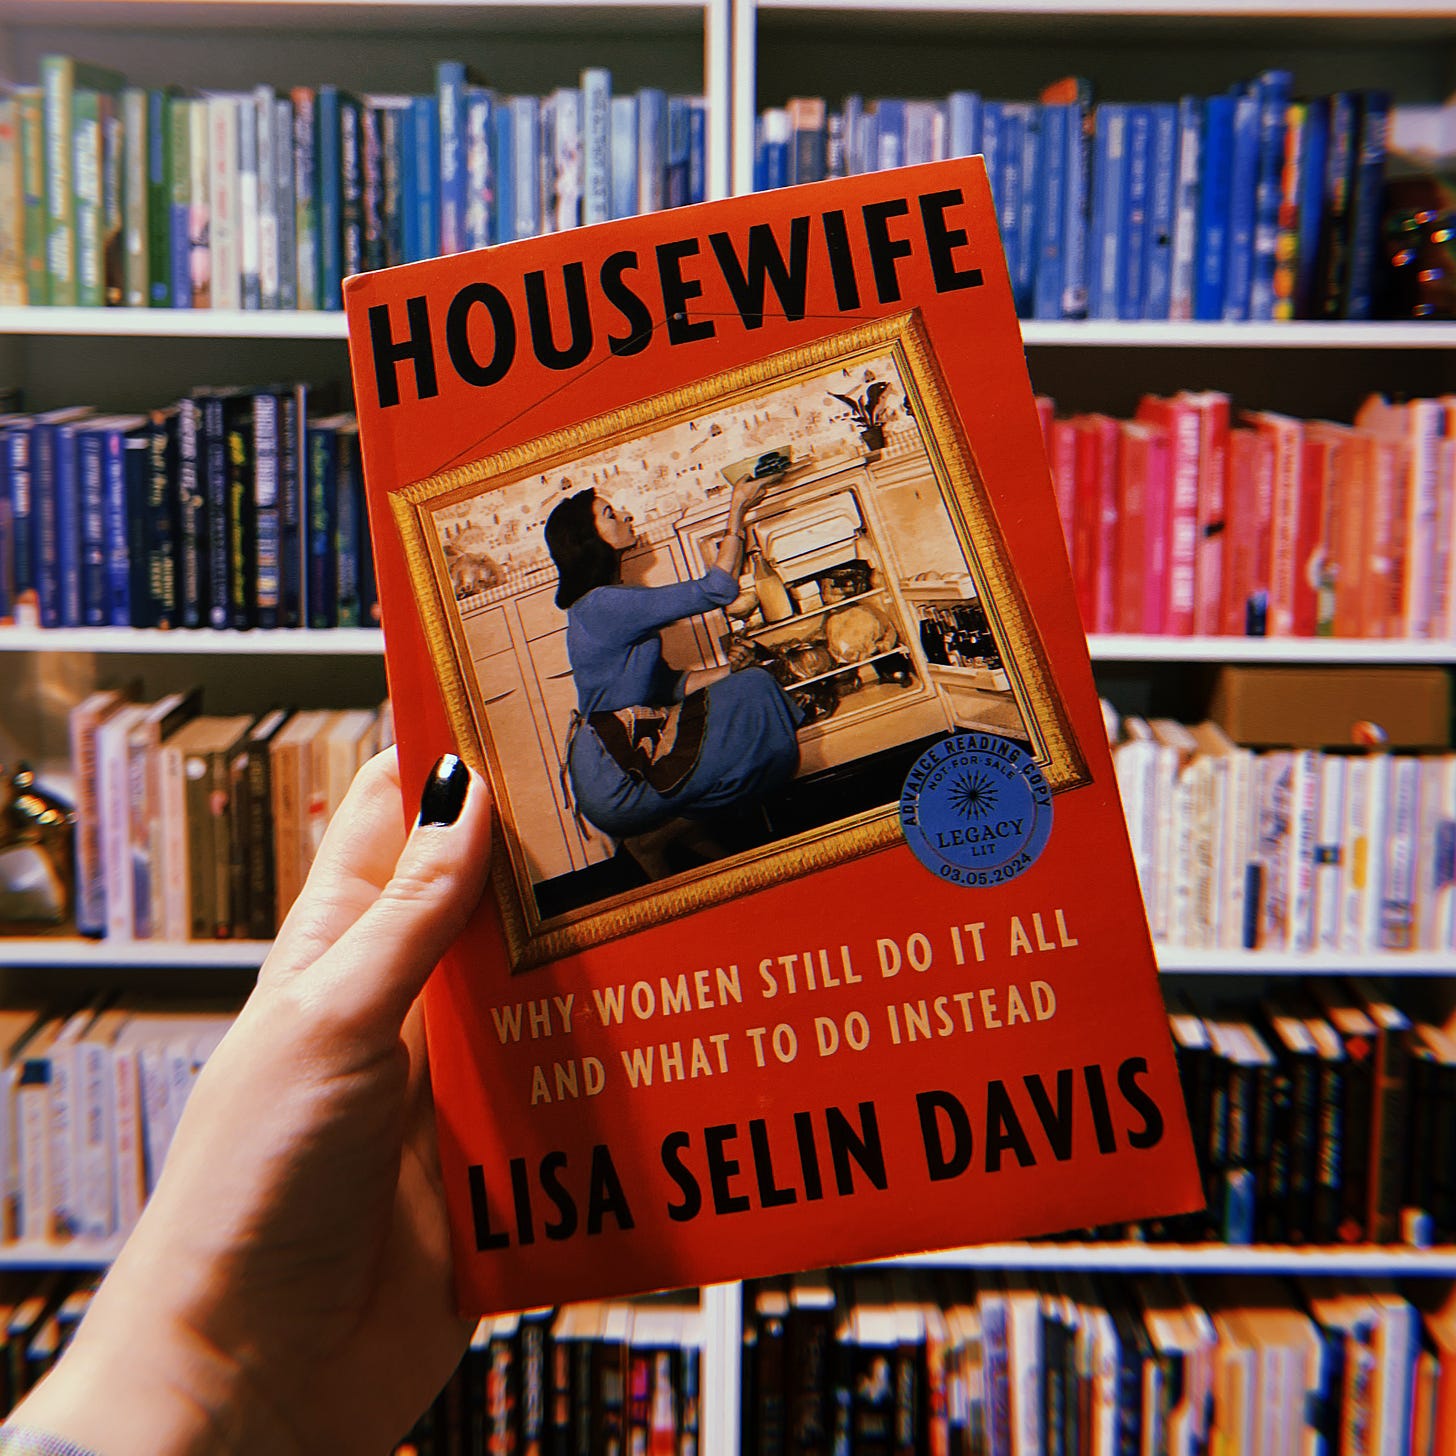 A hand holding up an advanced reader copy of Housewife: Why Women Still Do It All and What to Do Instead by Lisa Selin Davis. A bookshelf is in the background.